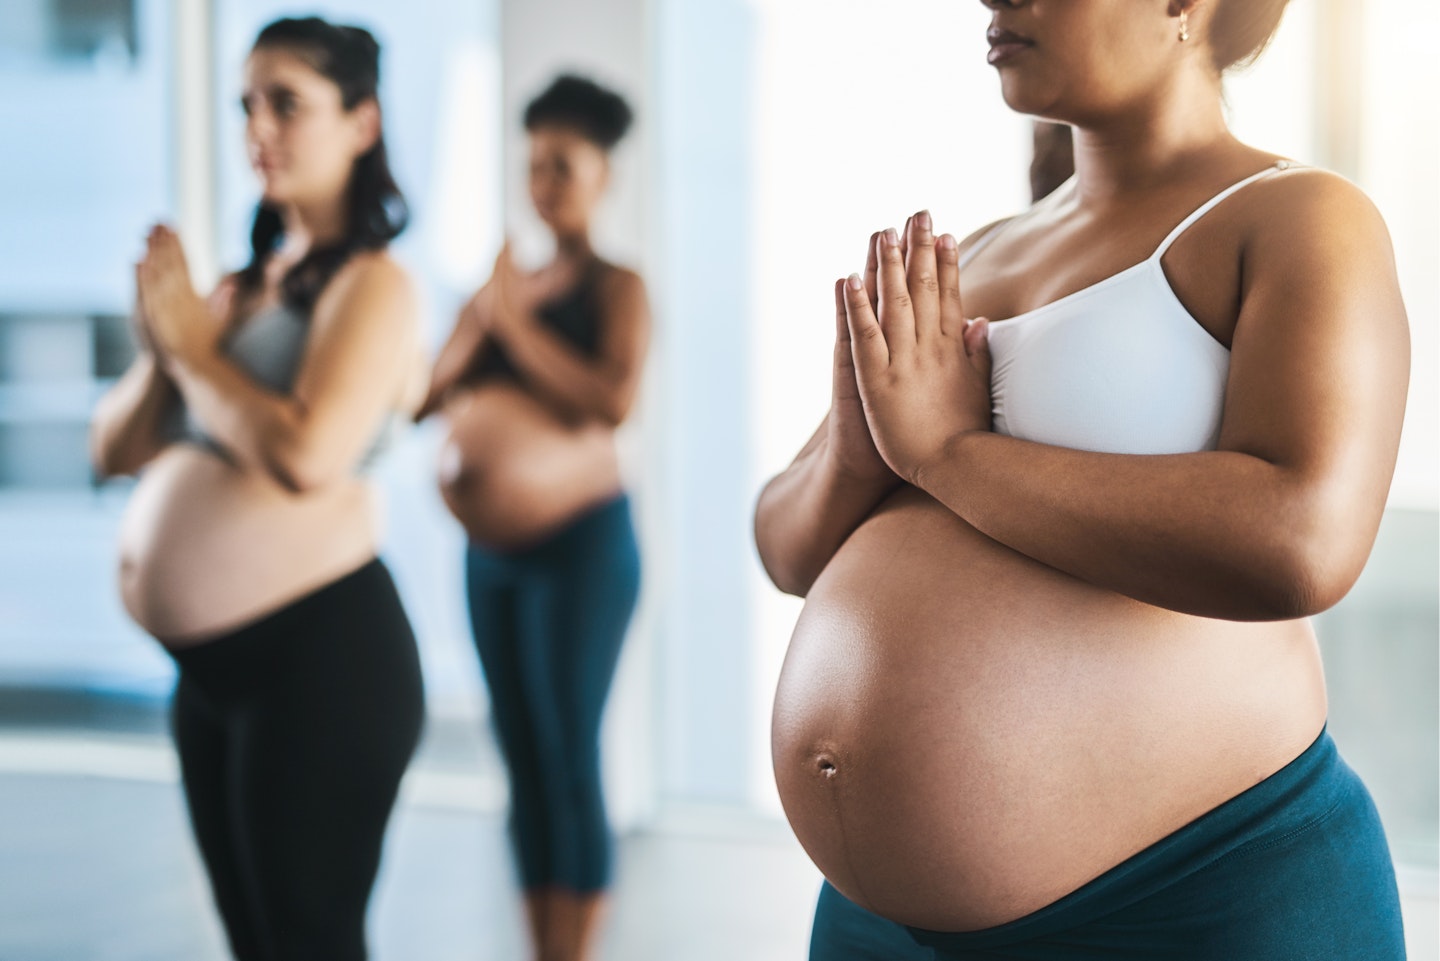 7 best pregnancy exercises to stay fit and healthy